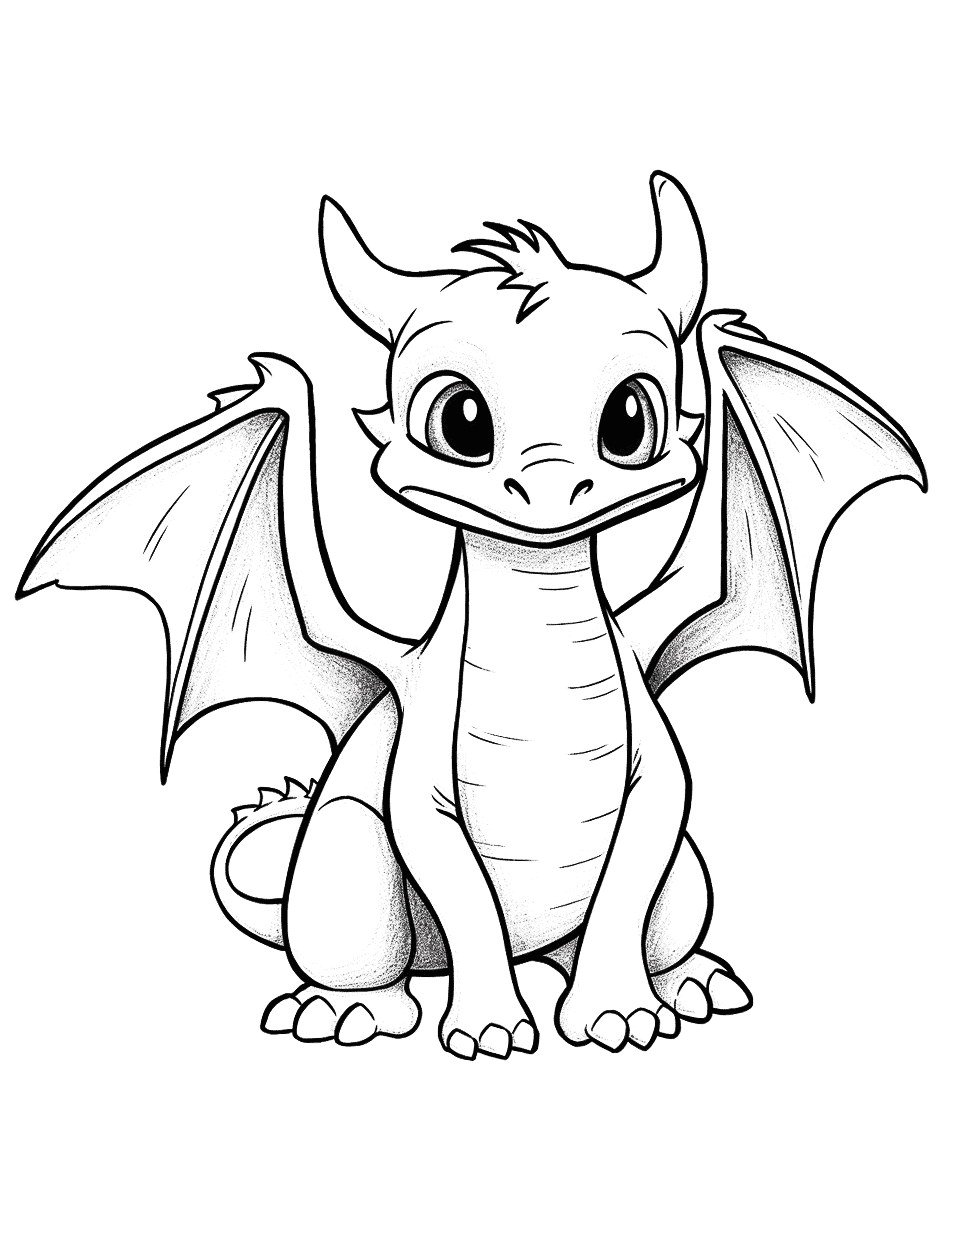 Night Fury Dragon Coloring Page - The Night Fury dragon, Toothless, from How to Train Your Dragon, playfully spreading his wings.